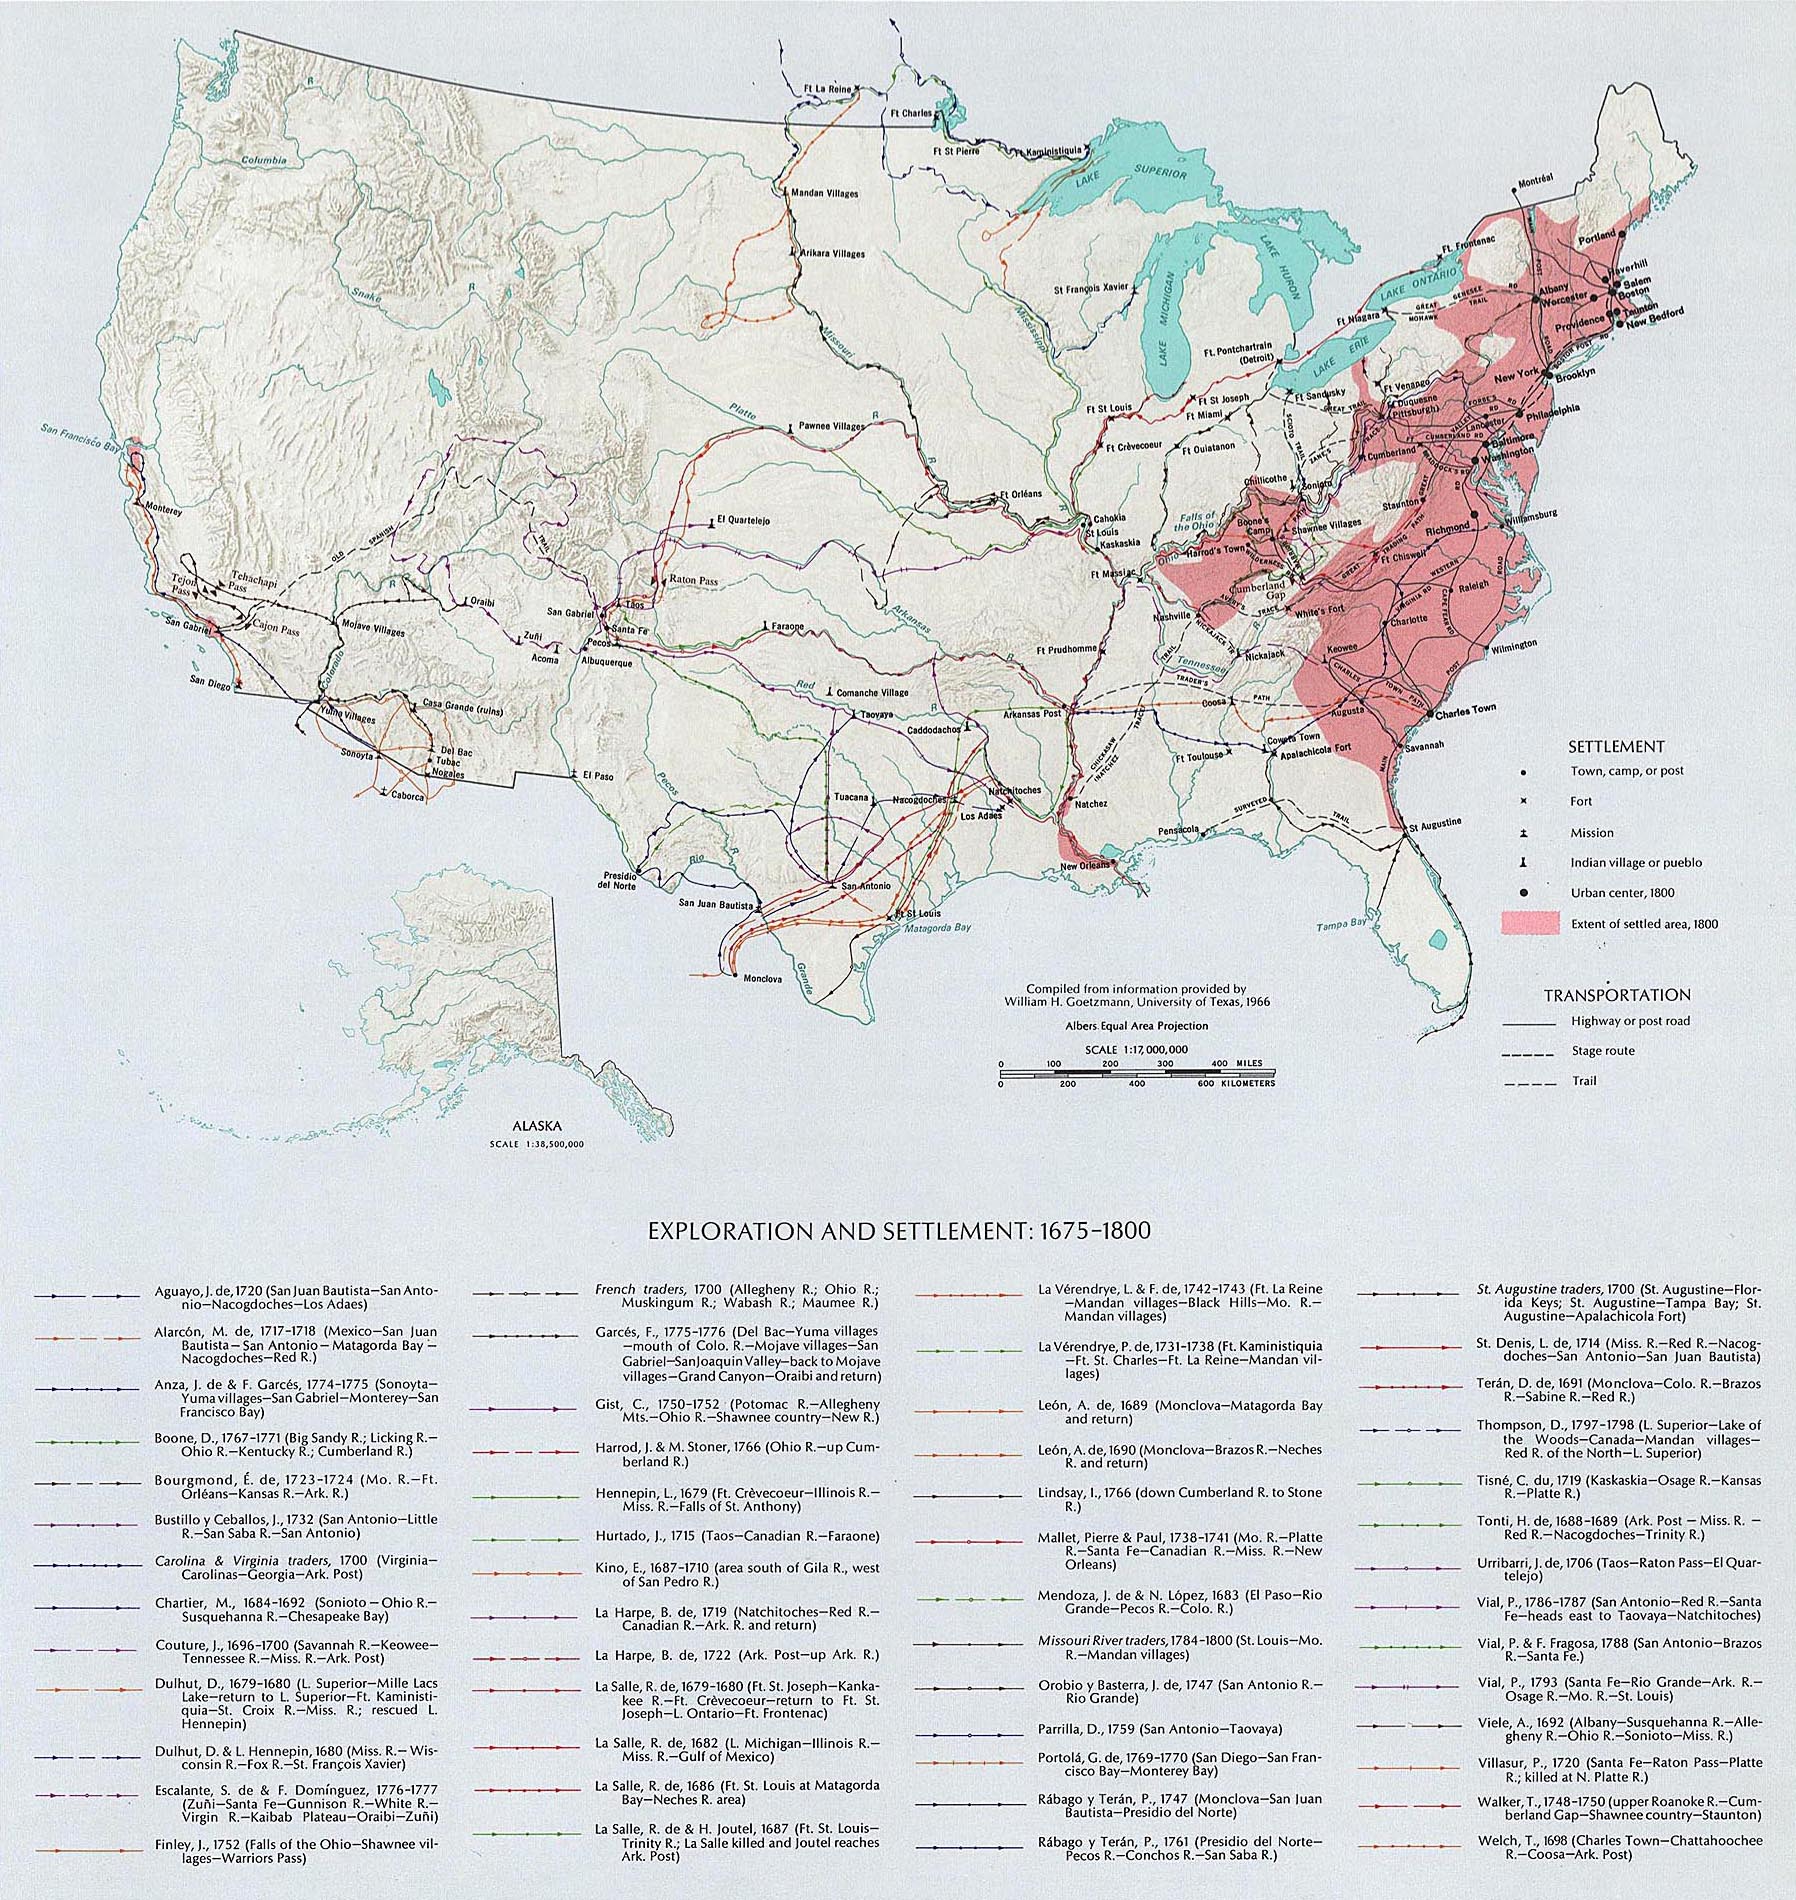 Map of the United States - Exploration and Settlement 1675-1800